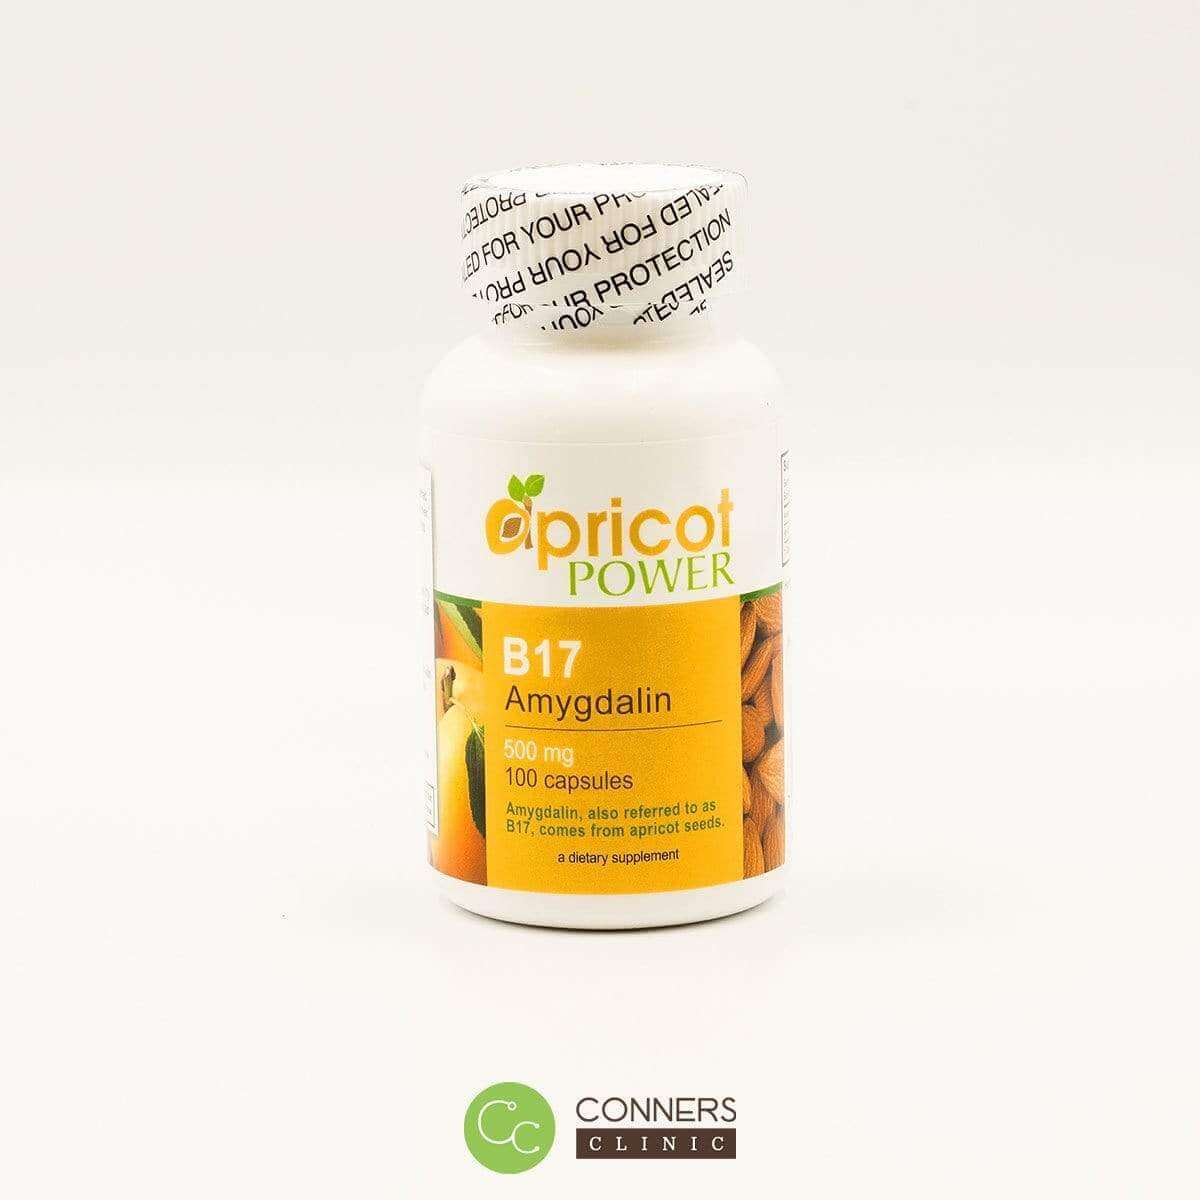 Apricot Power - B17/Amygdalin 500 mg Capsules Apricot Power Supplement - Conners Clinic